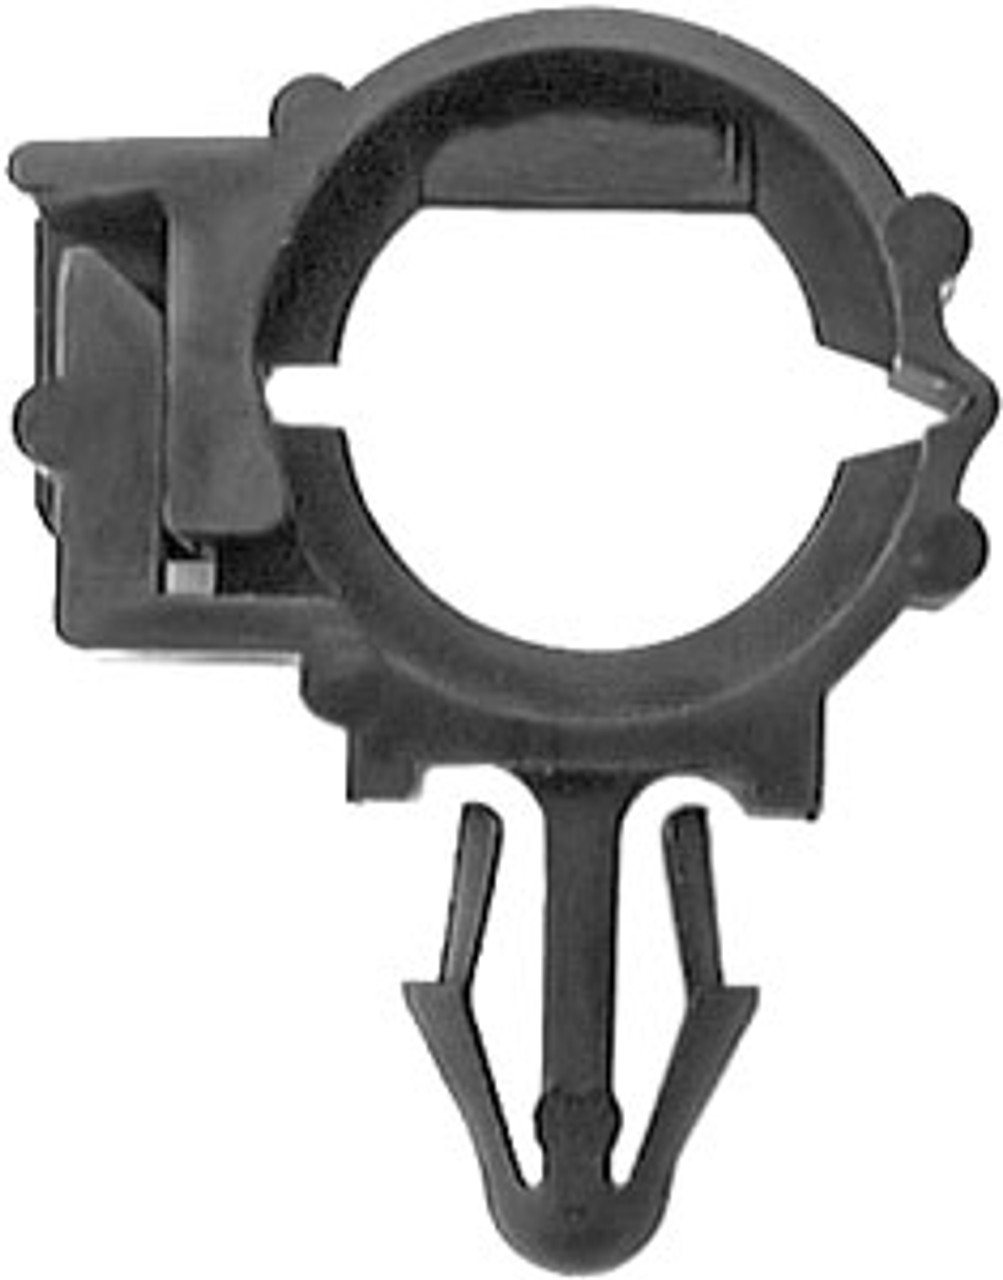 Wire Loom Routing Clip
Inner Diameter: 1/4"
Outter Diameter: 3/8"
OEM# 12015631
Nylon
Type 4
15 Per Box
Click Next Image For Wire Loom Clip Size Chart